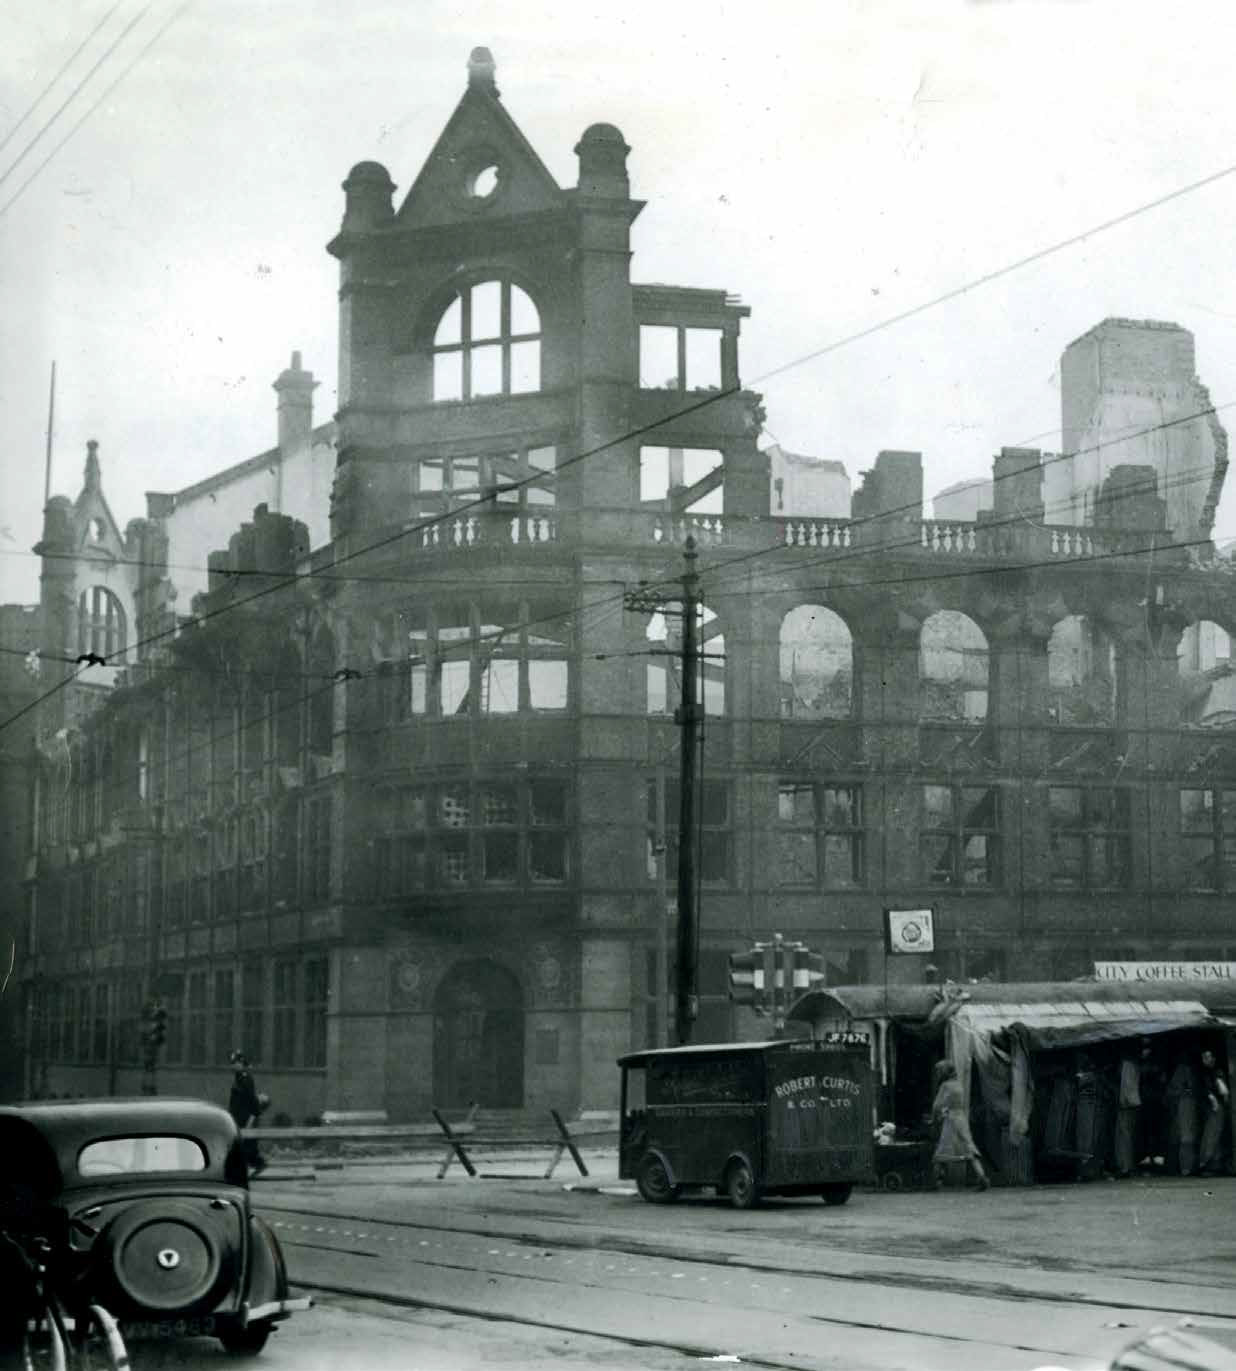 The ruins of the Freeman, Hardy and Willis building, with the fondly remembered City Coffee Stall in front - Austin J. Ruddy